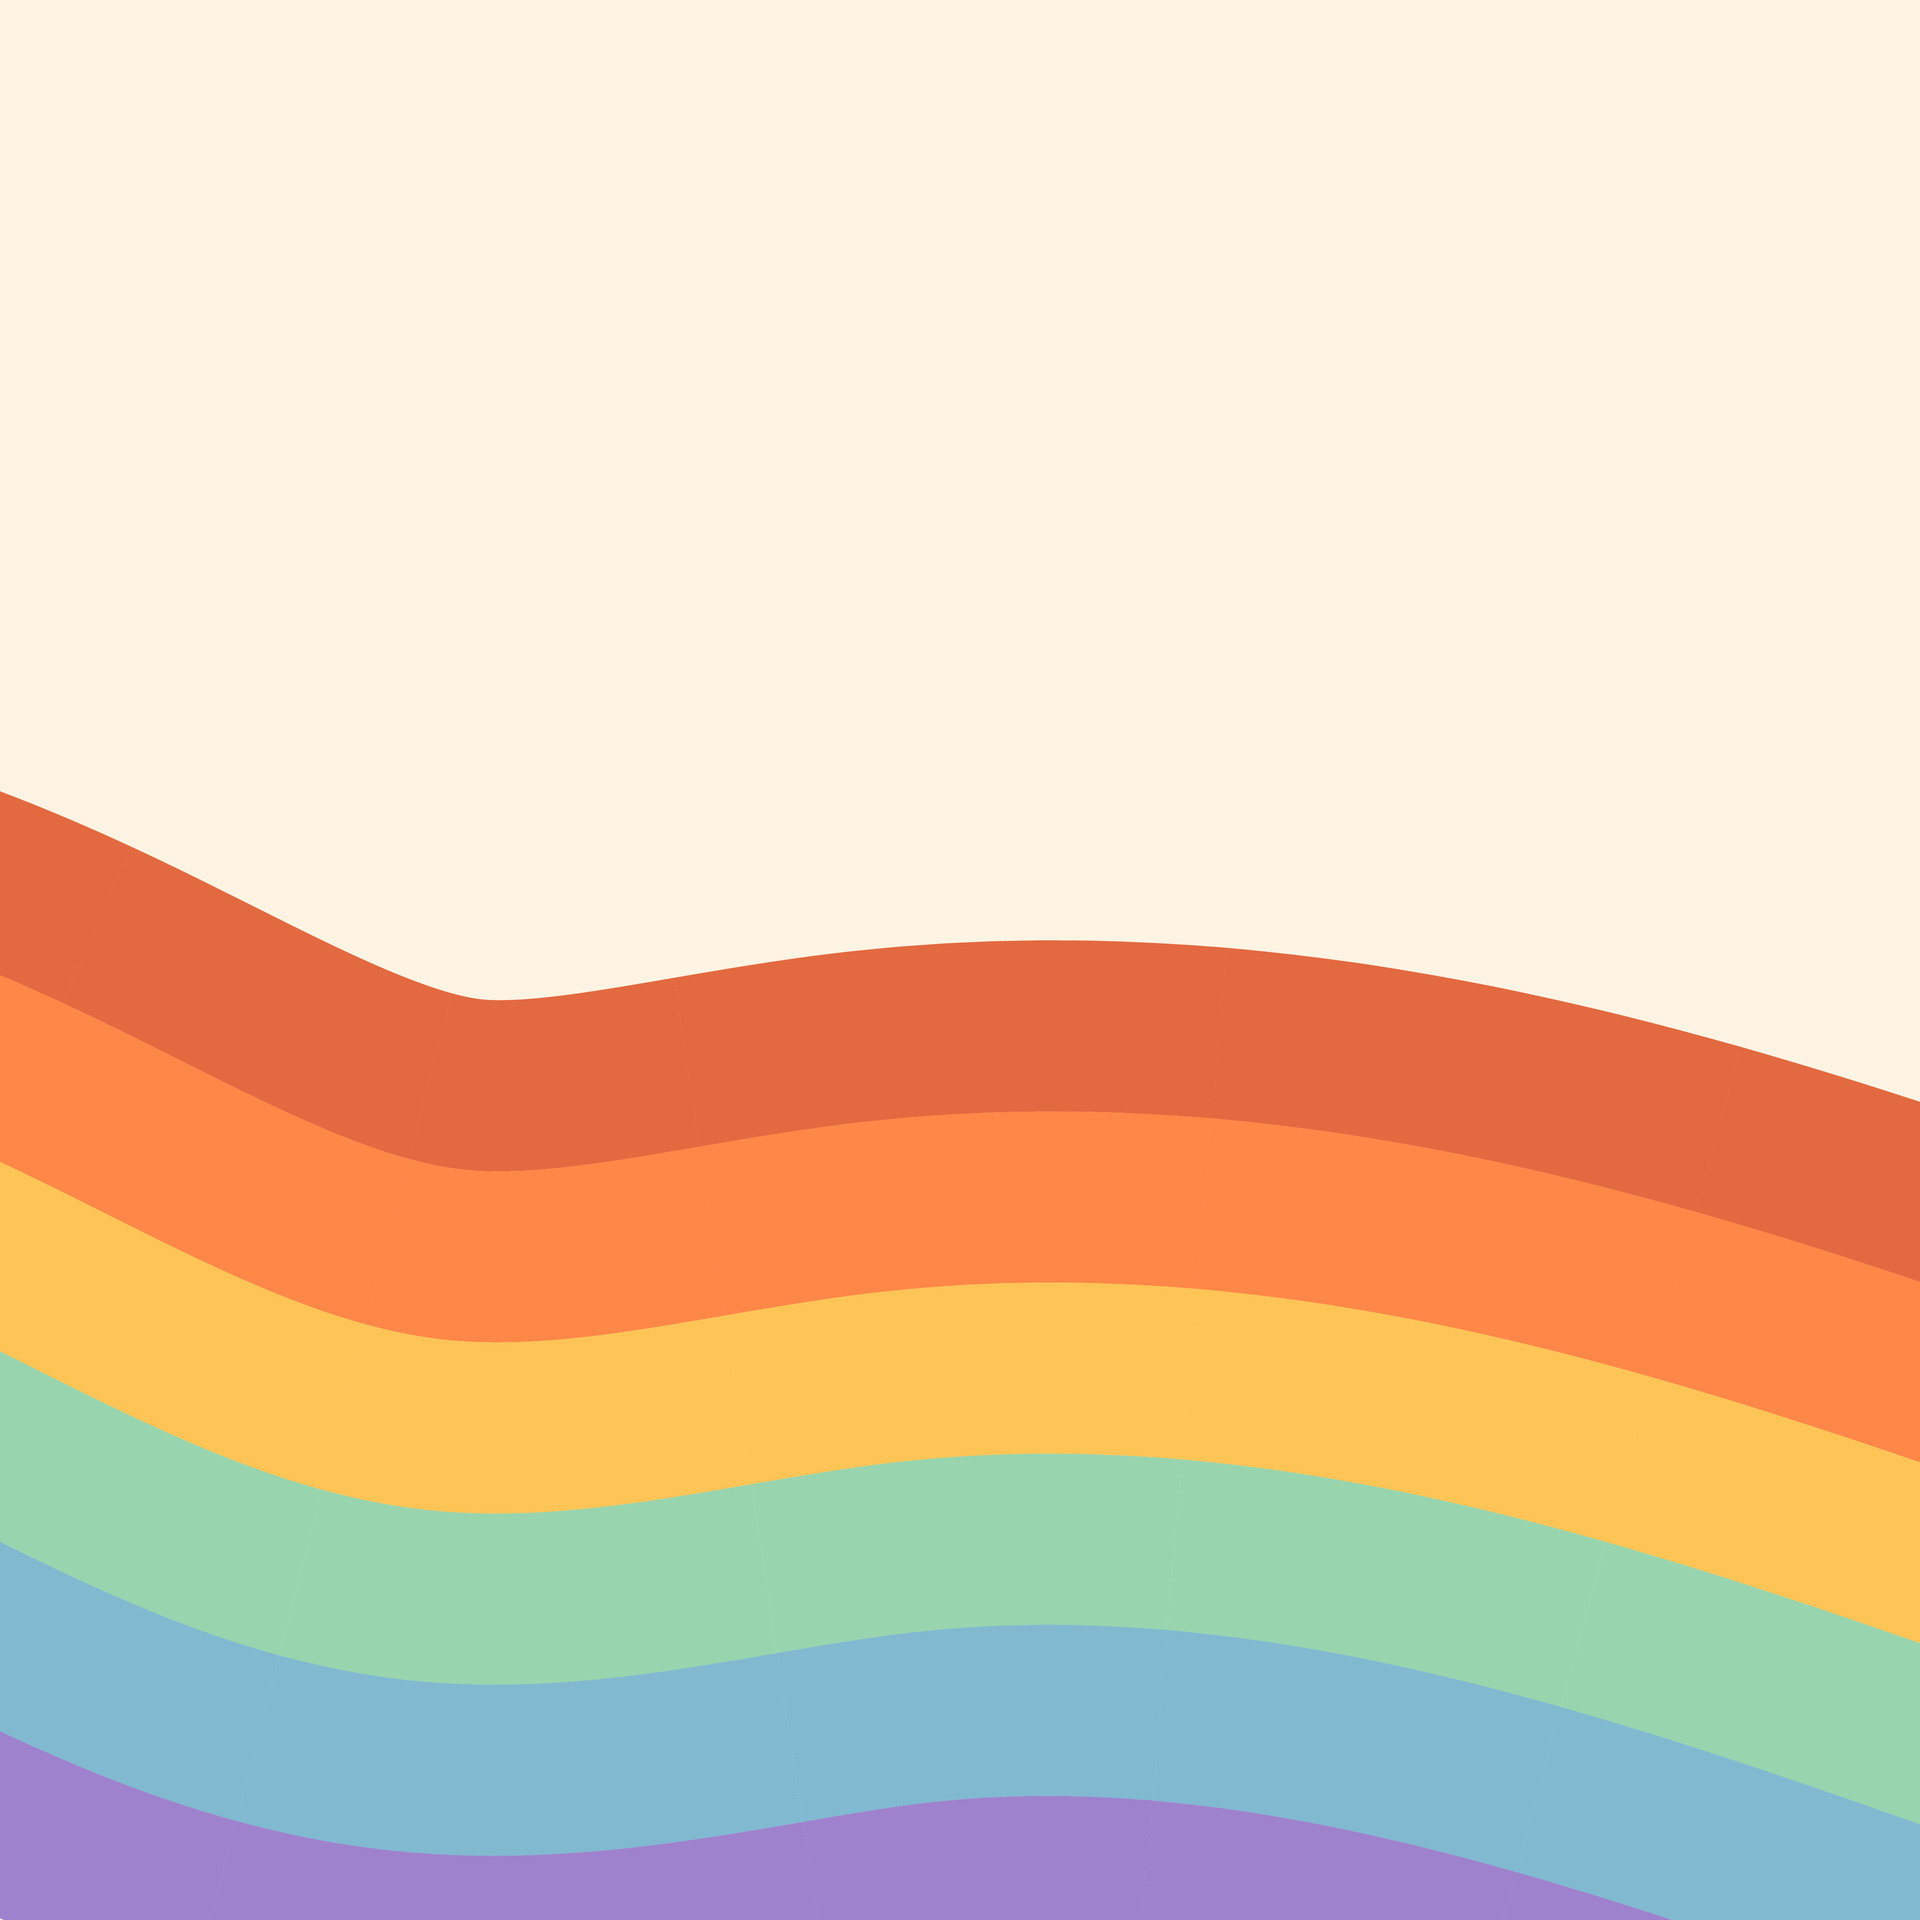 https://static.vecteezy.com/system/resources/previews/026/395/735/original/retro-rainbow-striped-background-with-copy-space-abstract-groovy-design-in-doodle-style-square-template-for-cover-social-media-post-banner-or-poster-vector.jpg